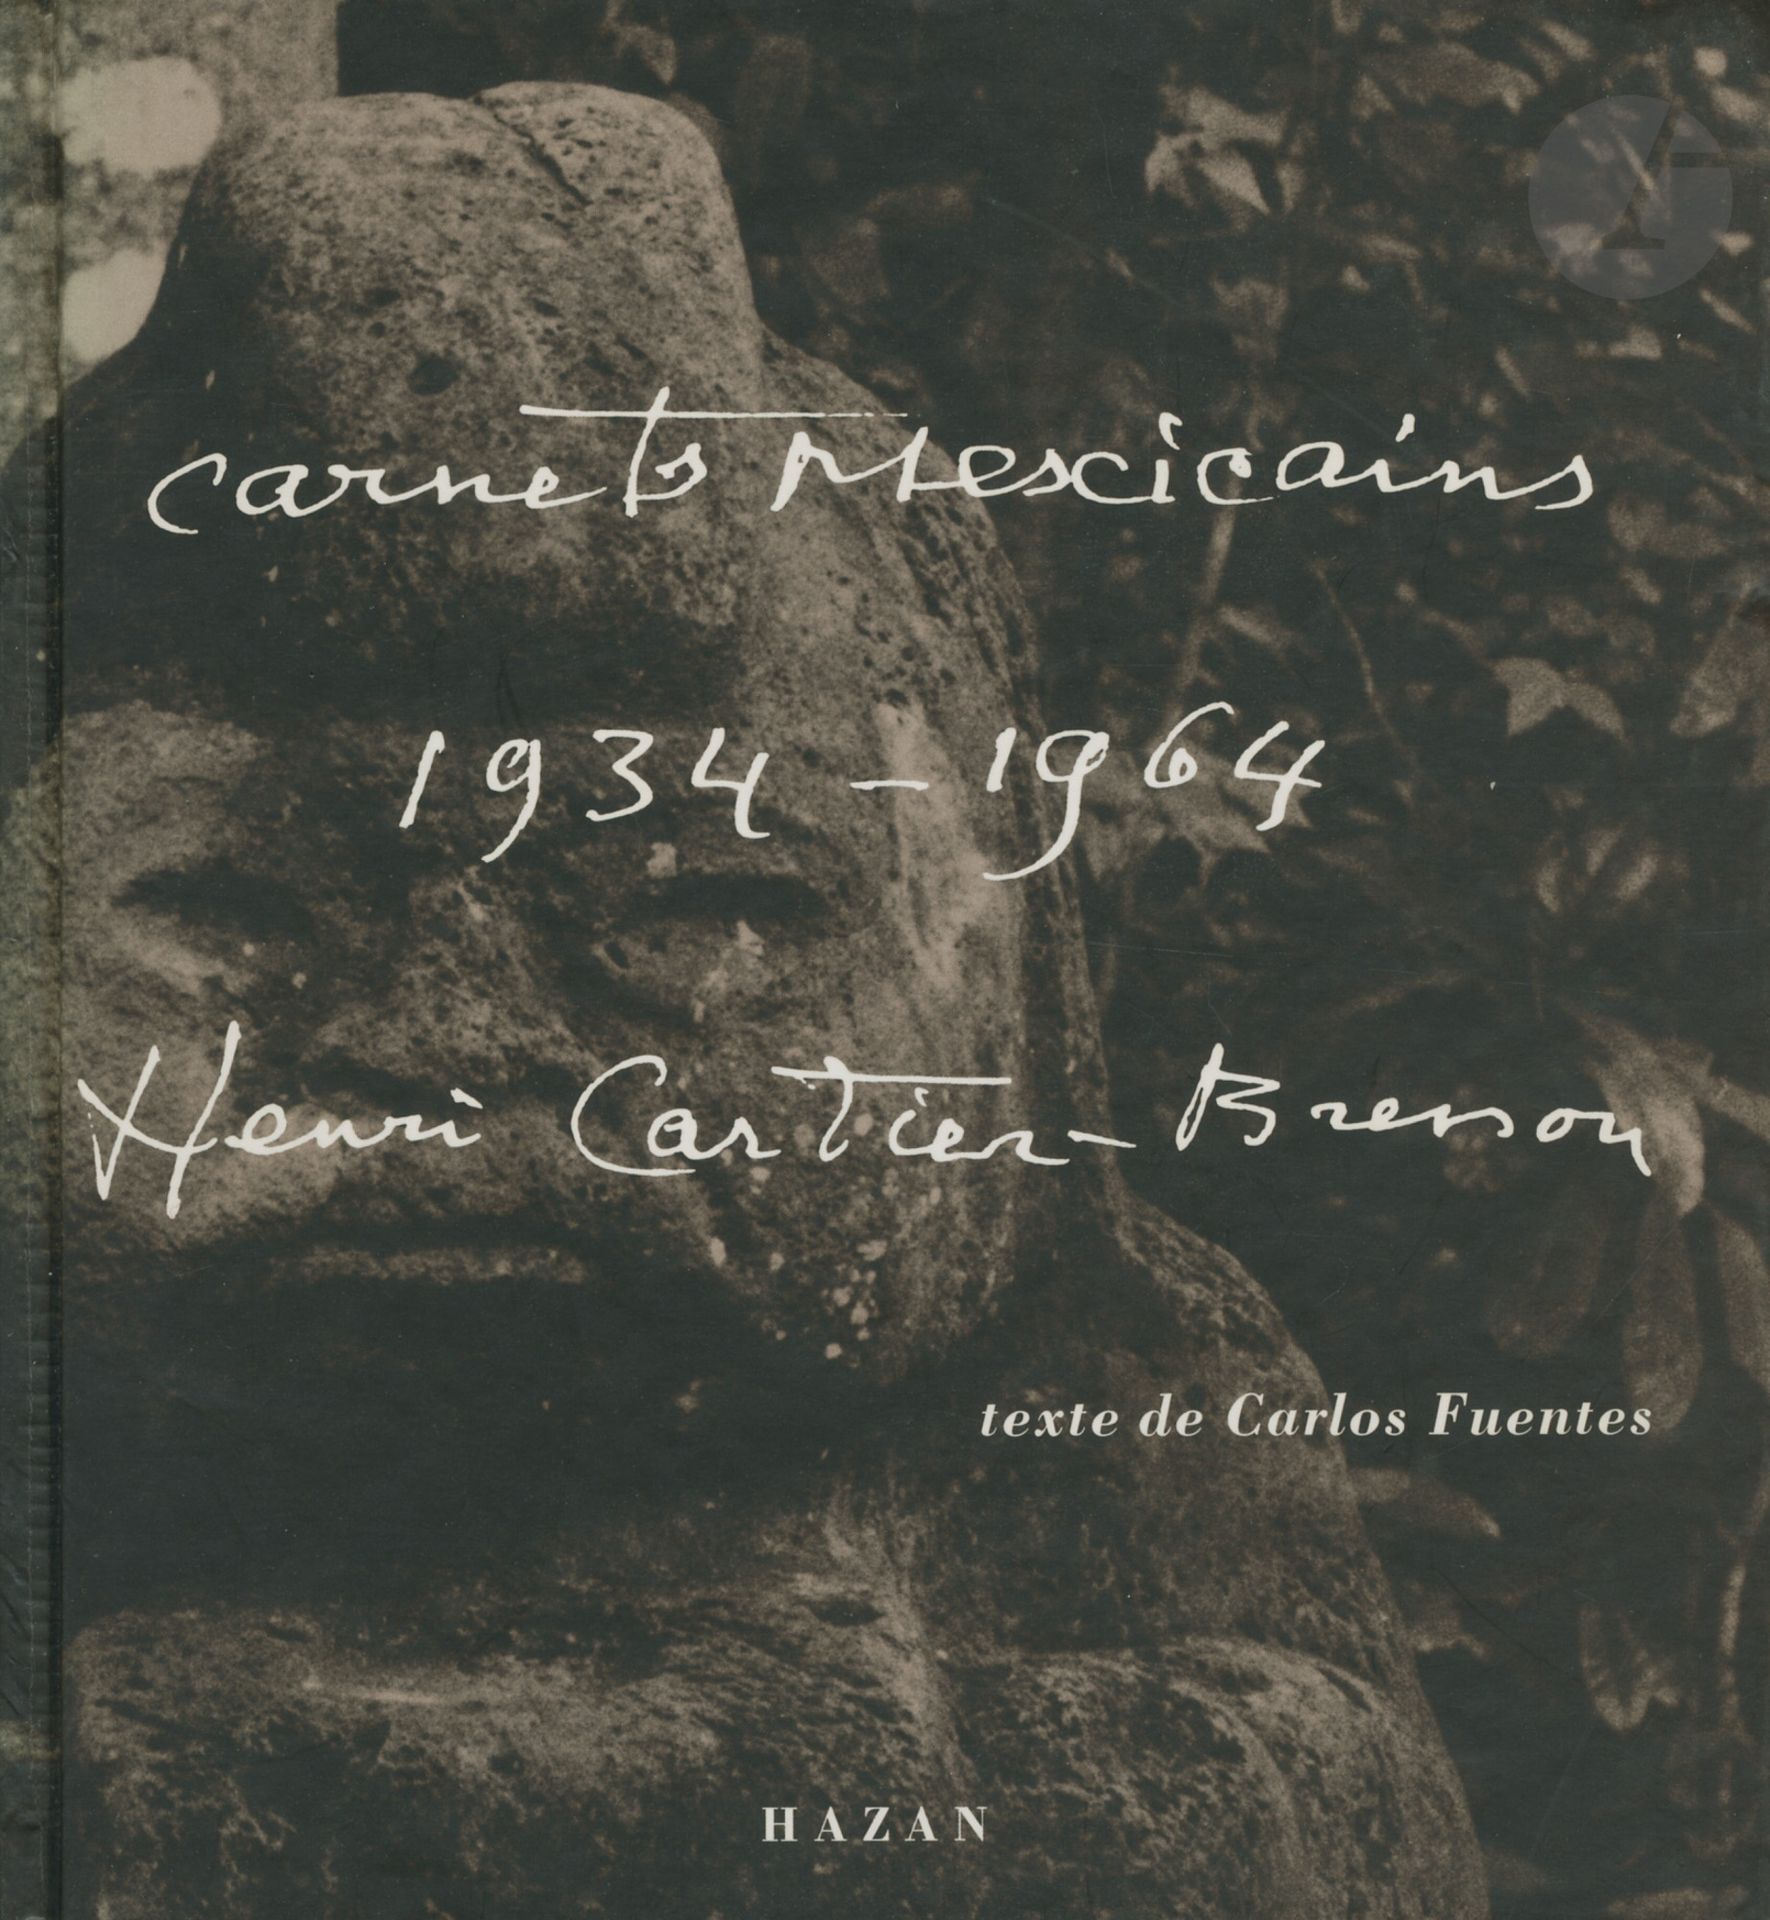 Null CARTIER-BRESSON, HENRI (1908-2004) [Firmado]
Carnets mexicains 1934-1964.
H&hellip;